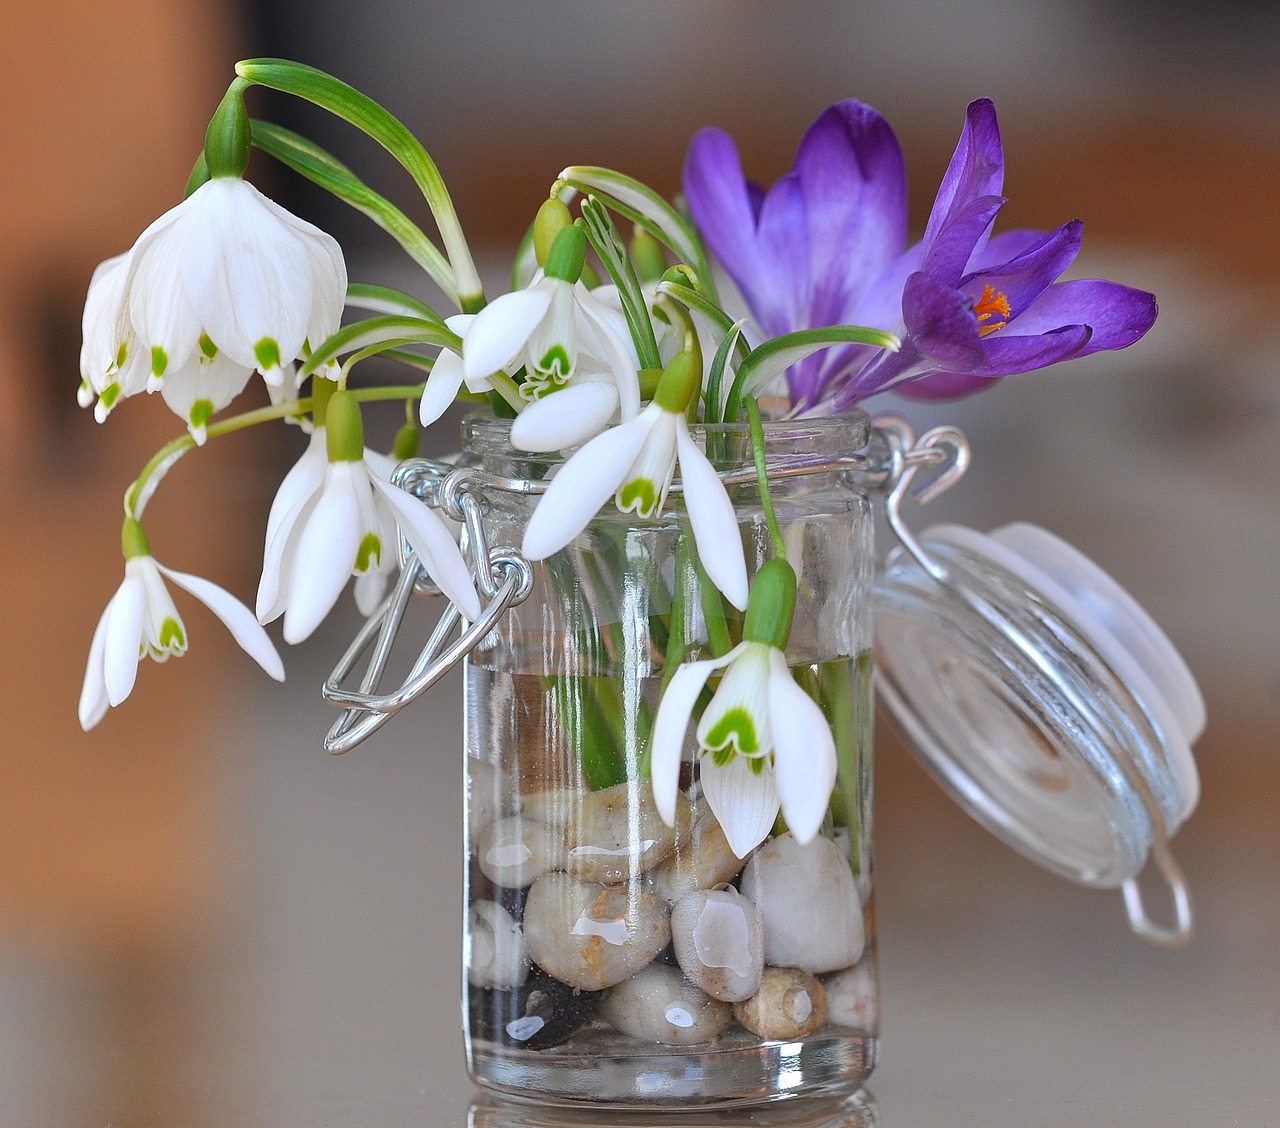 snowdrop lily of the valley crocus free photo